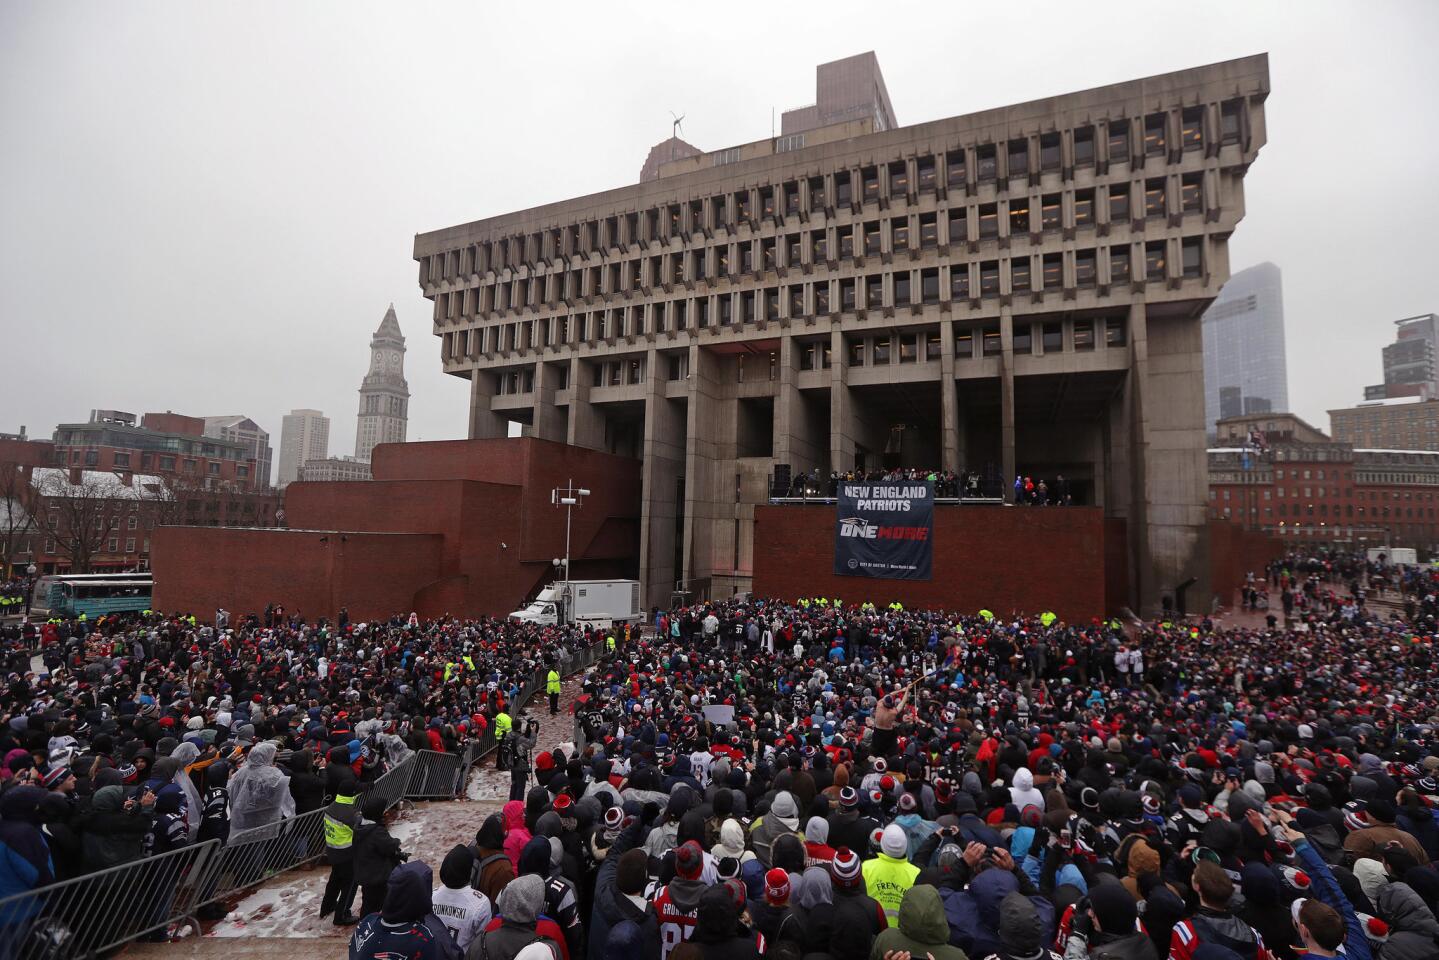 New England Patriots fans gather at city hall plaza for today's rally during Super Bowl LI victory parade in Boston